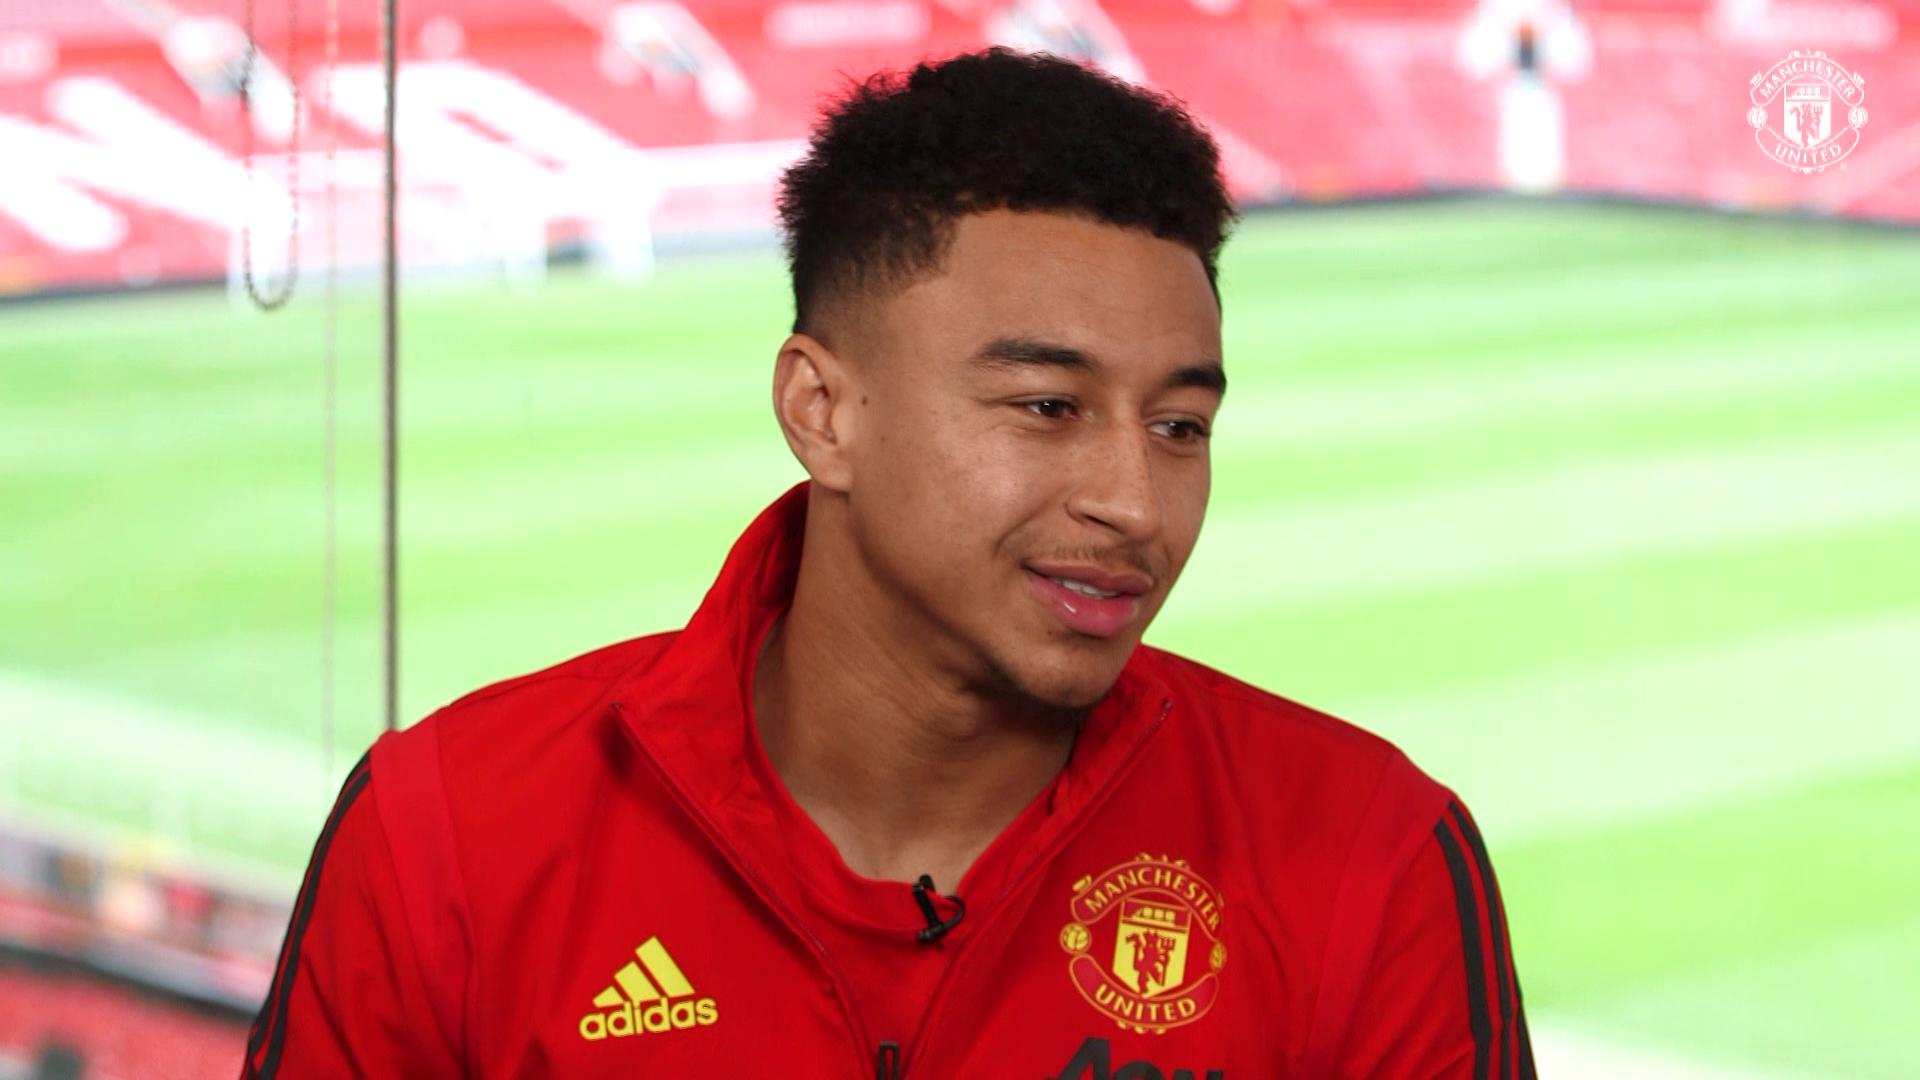 Jesse Lingard rewatches the 2011 FA Youth Cup final v Sheffield United | Manchester United